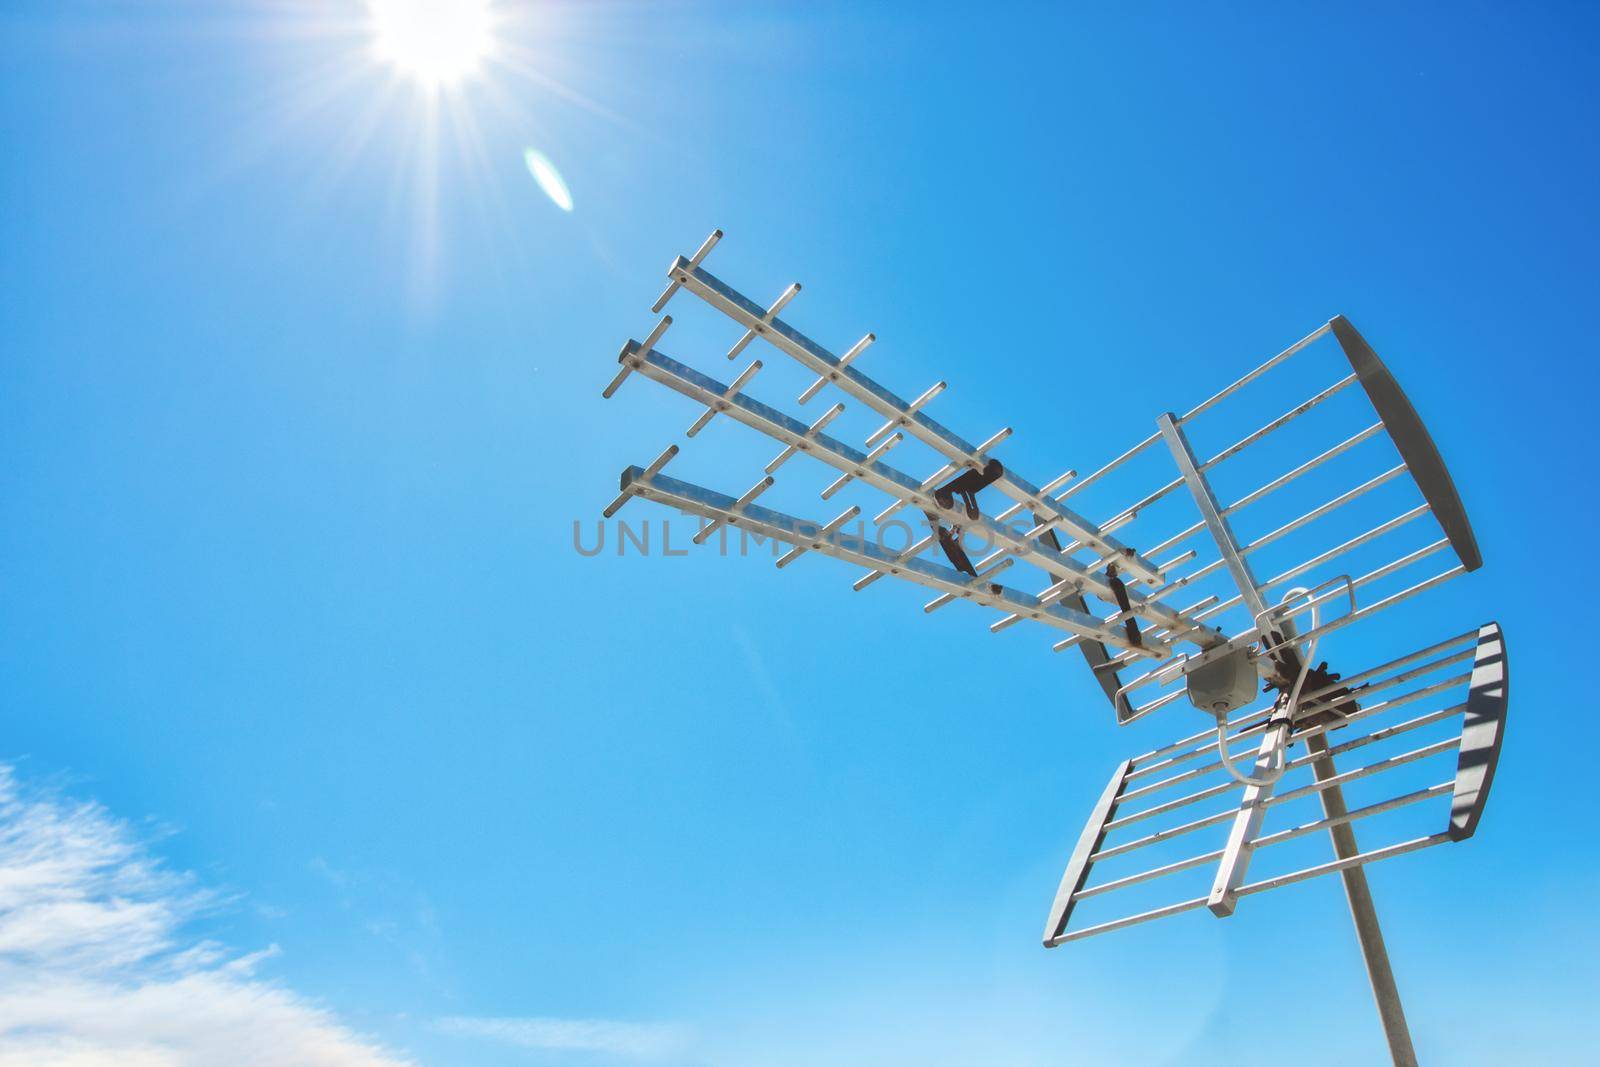 Television antenna on a rooftop against a clear sunny blue sky